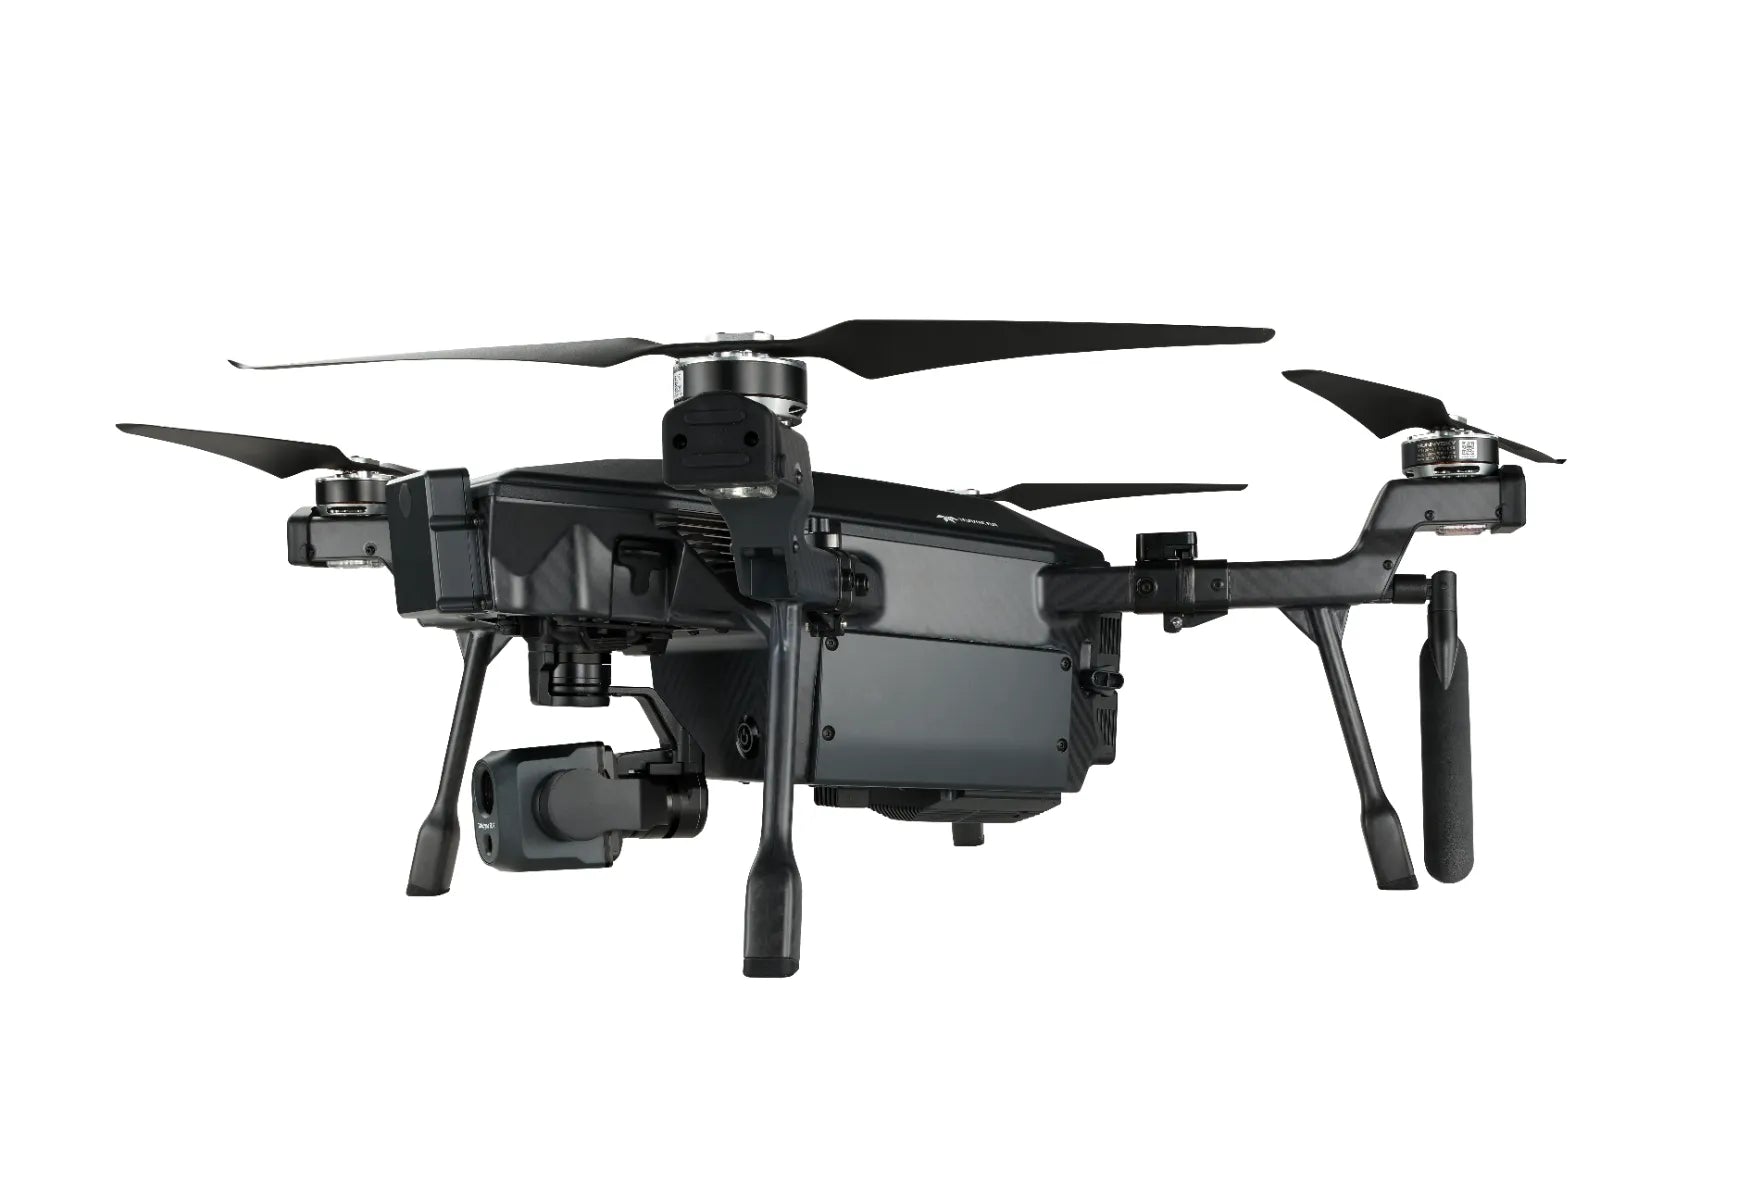 Teledyne FLIR SIRAS Drone - Professional Drone With Thermal and Visible Camera Payload Teledyne FLIR Florida Drone Supply Teledyne FLIR SIRAS - FLIR Thermal and Visible Camera Payload Drone